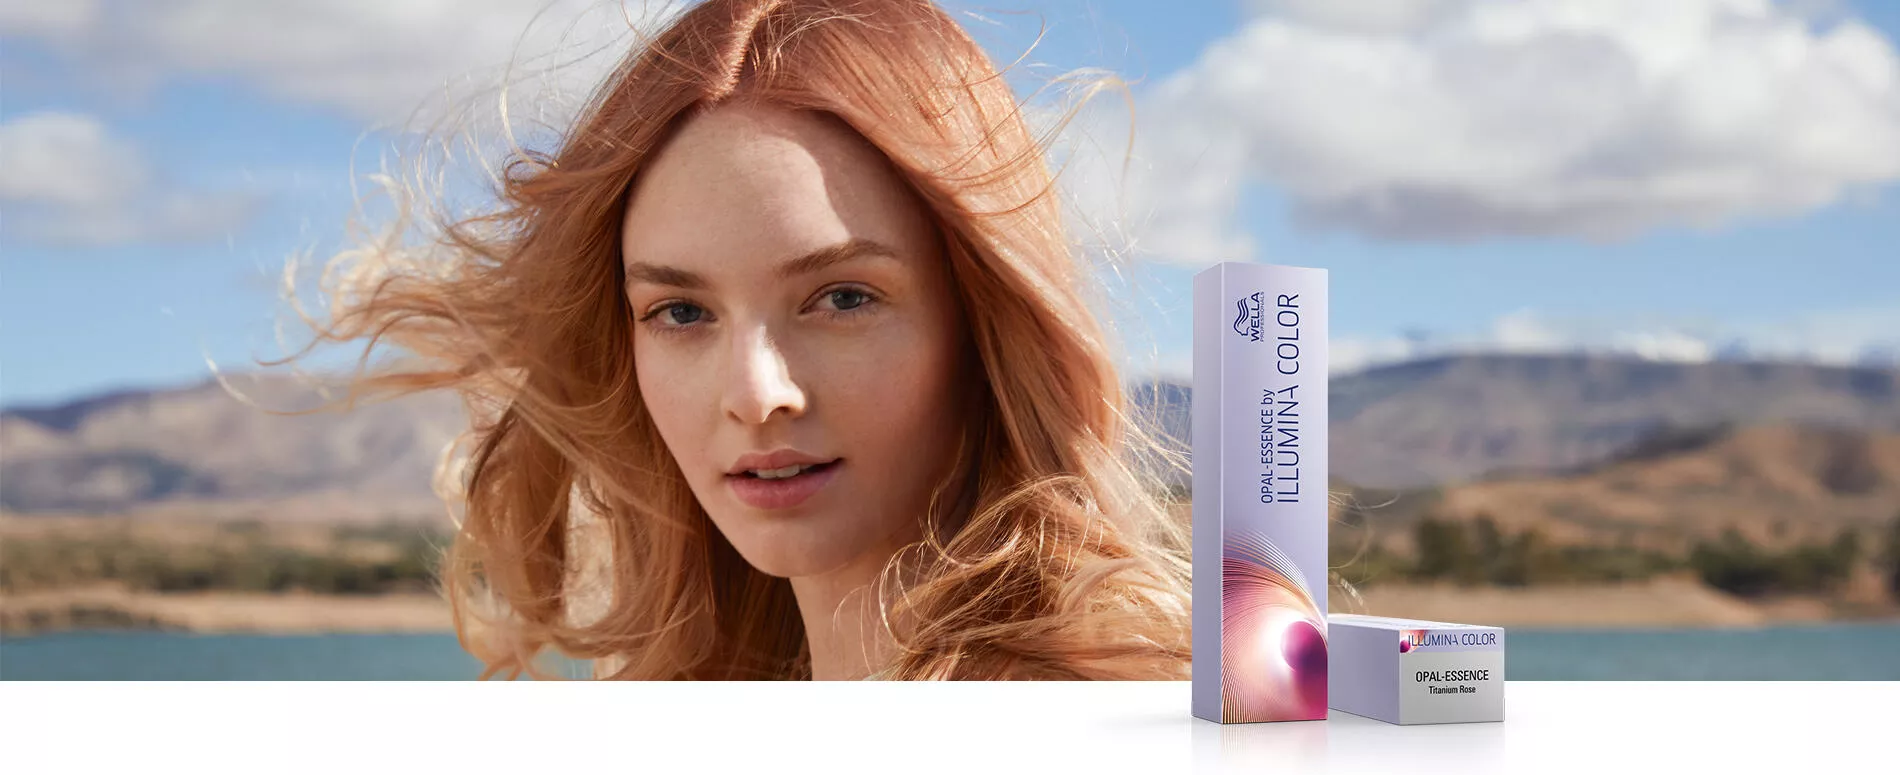 Woman with titanium rose hair treated with Opal-Essence by Illumina Color